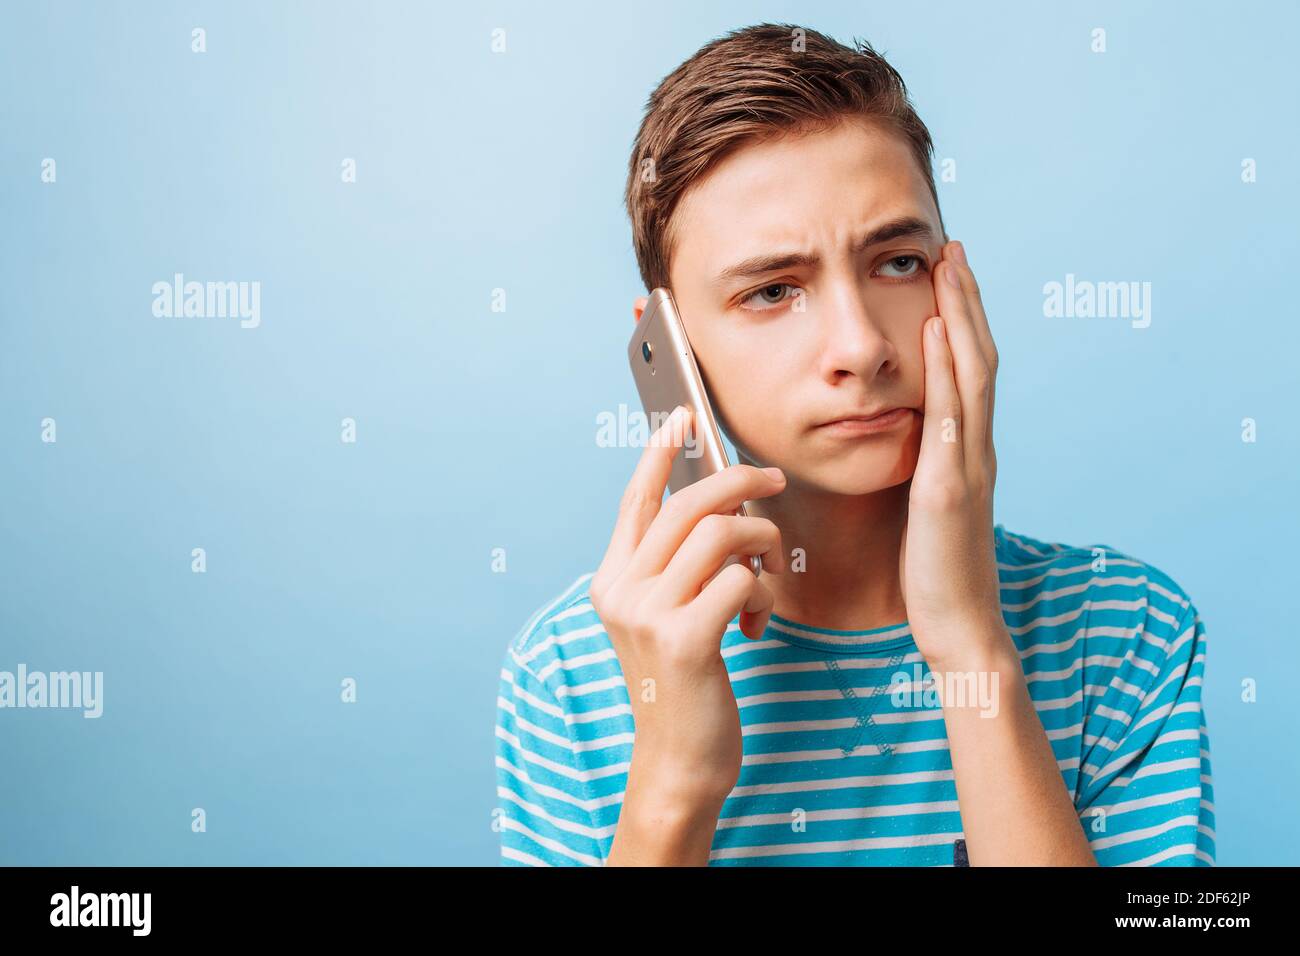 the guy is talking on the phone, upset by what he heard Stock Photo